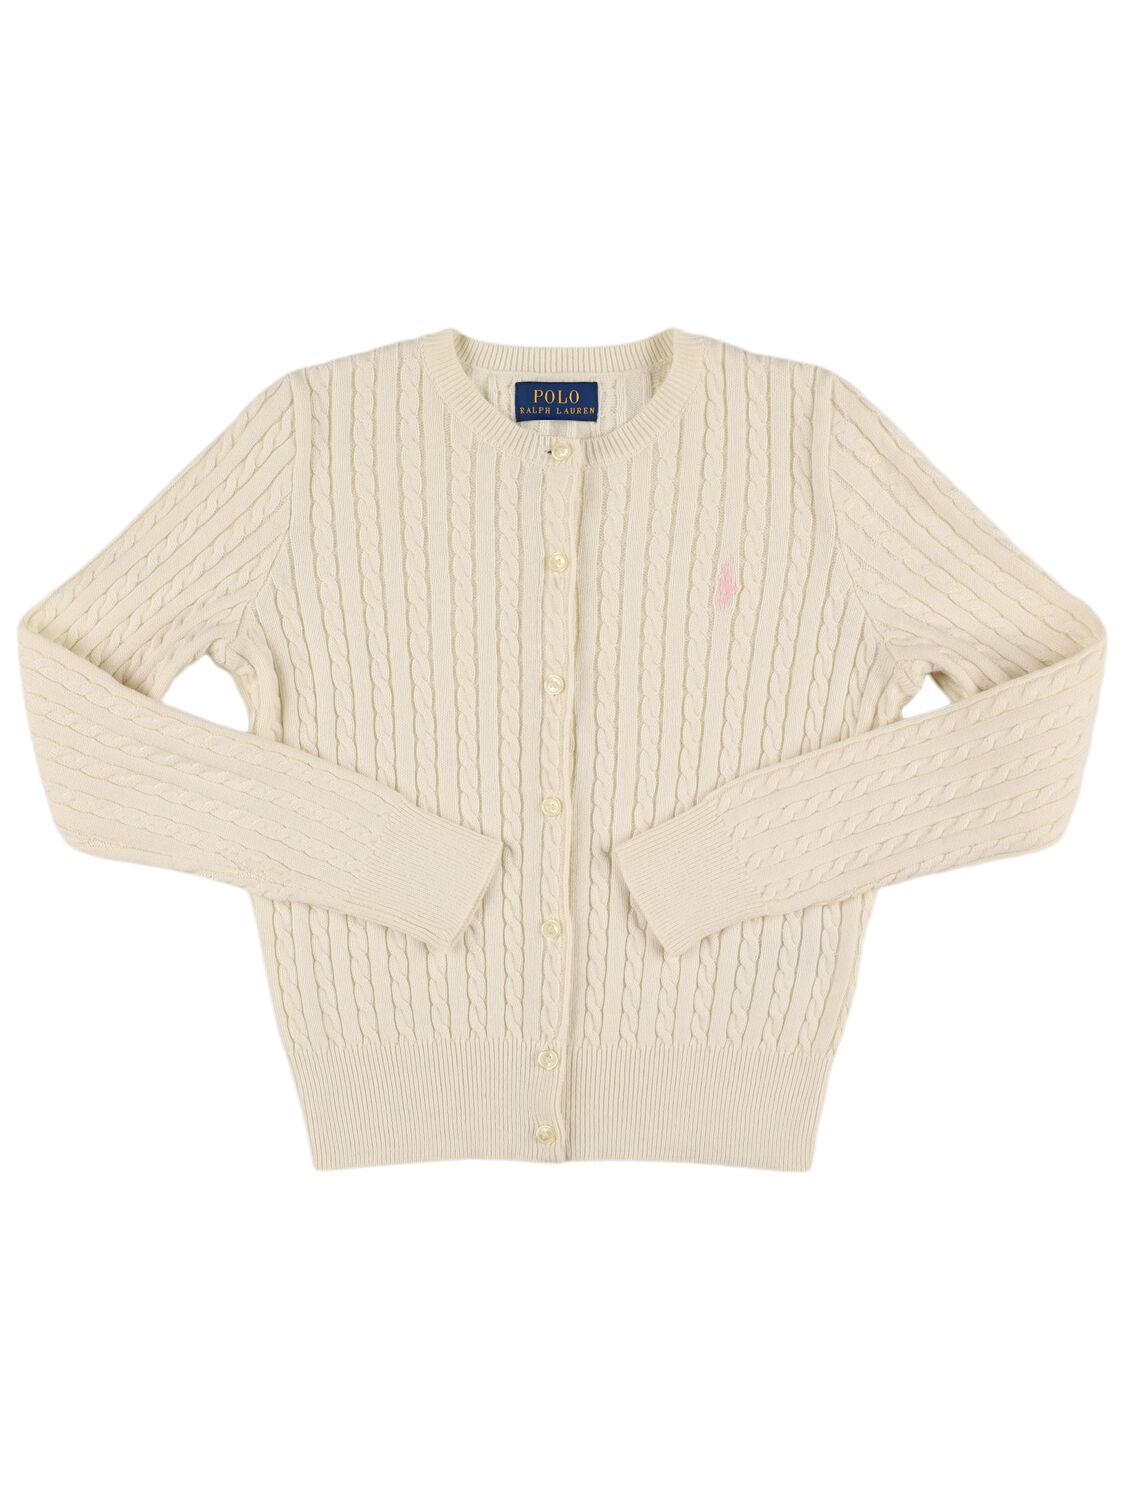 Ralph Lauren Babies' Cable Knit Cotton Cardigan W/ Logo In White